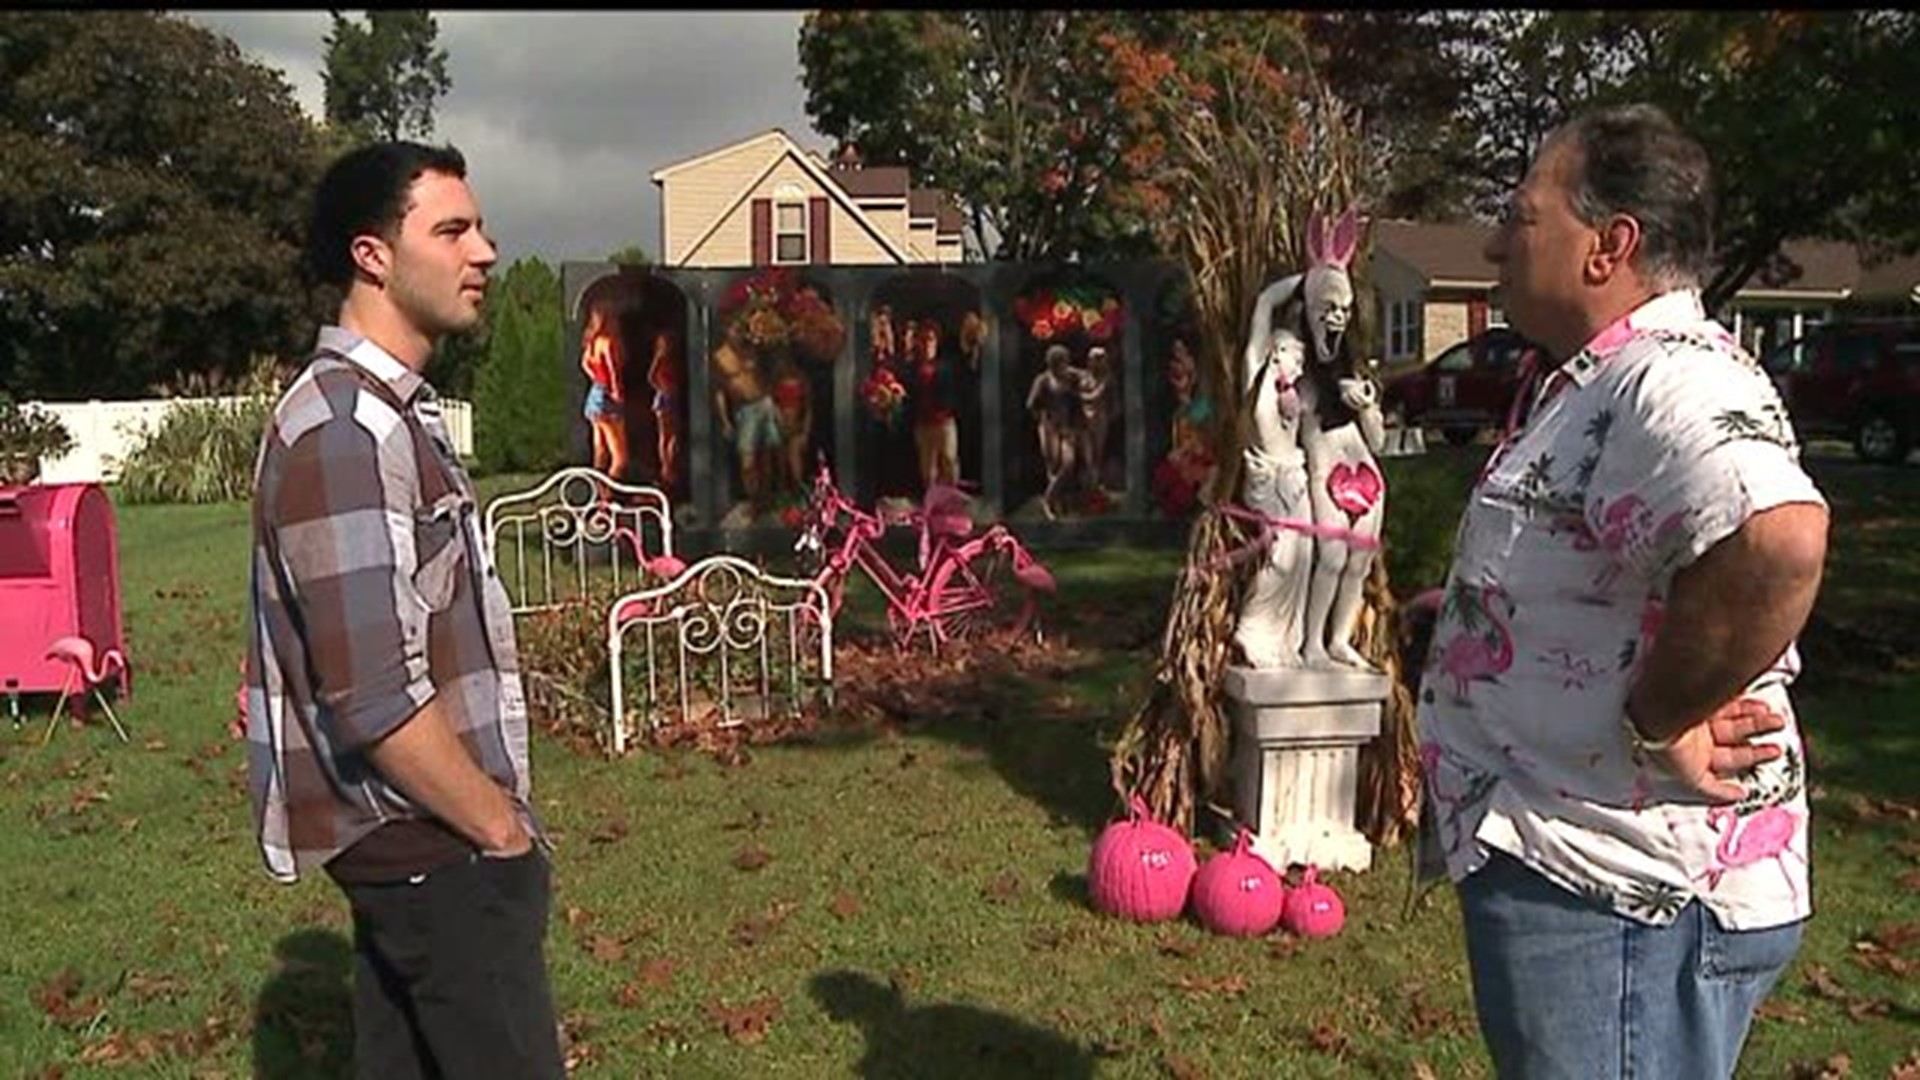 Lawn display features naked woman has neighbors upset